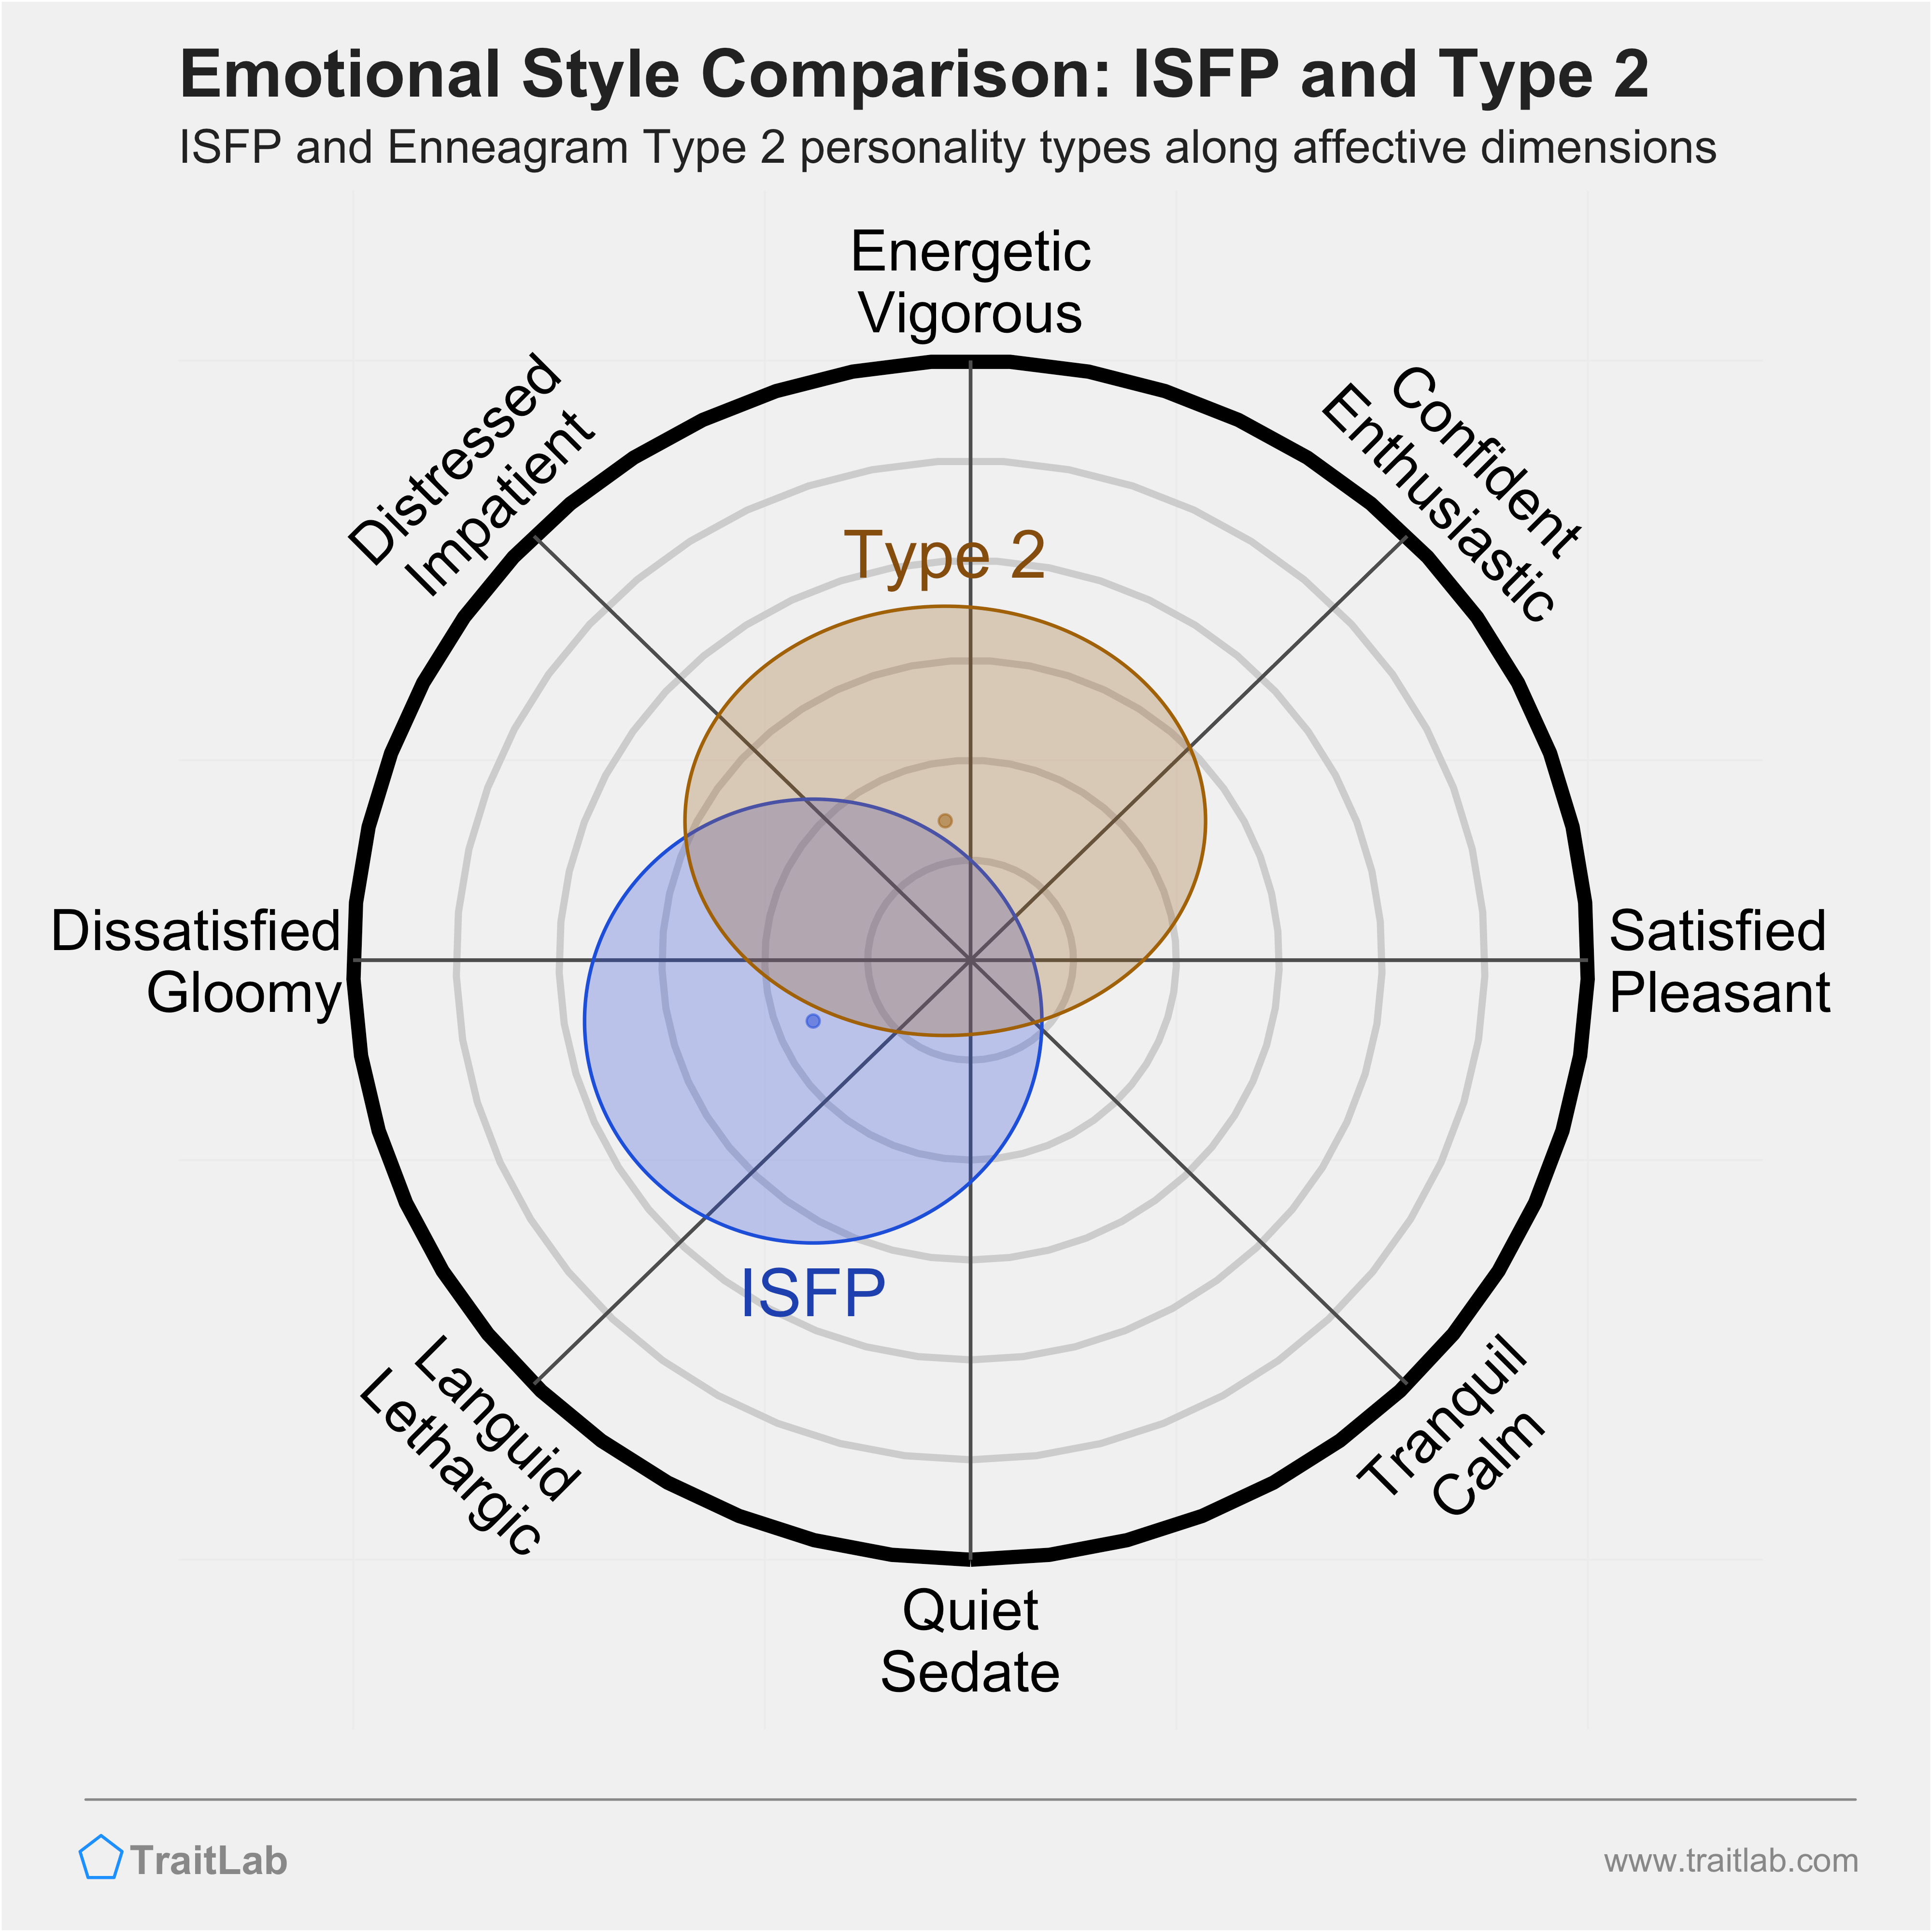 ISFP and Type 2 comparison across emotional (affective) dimensions